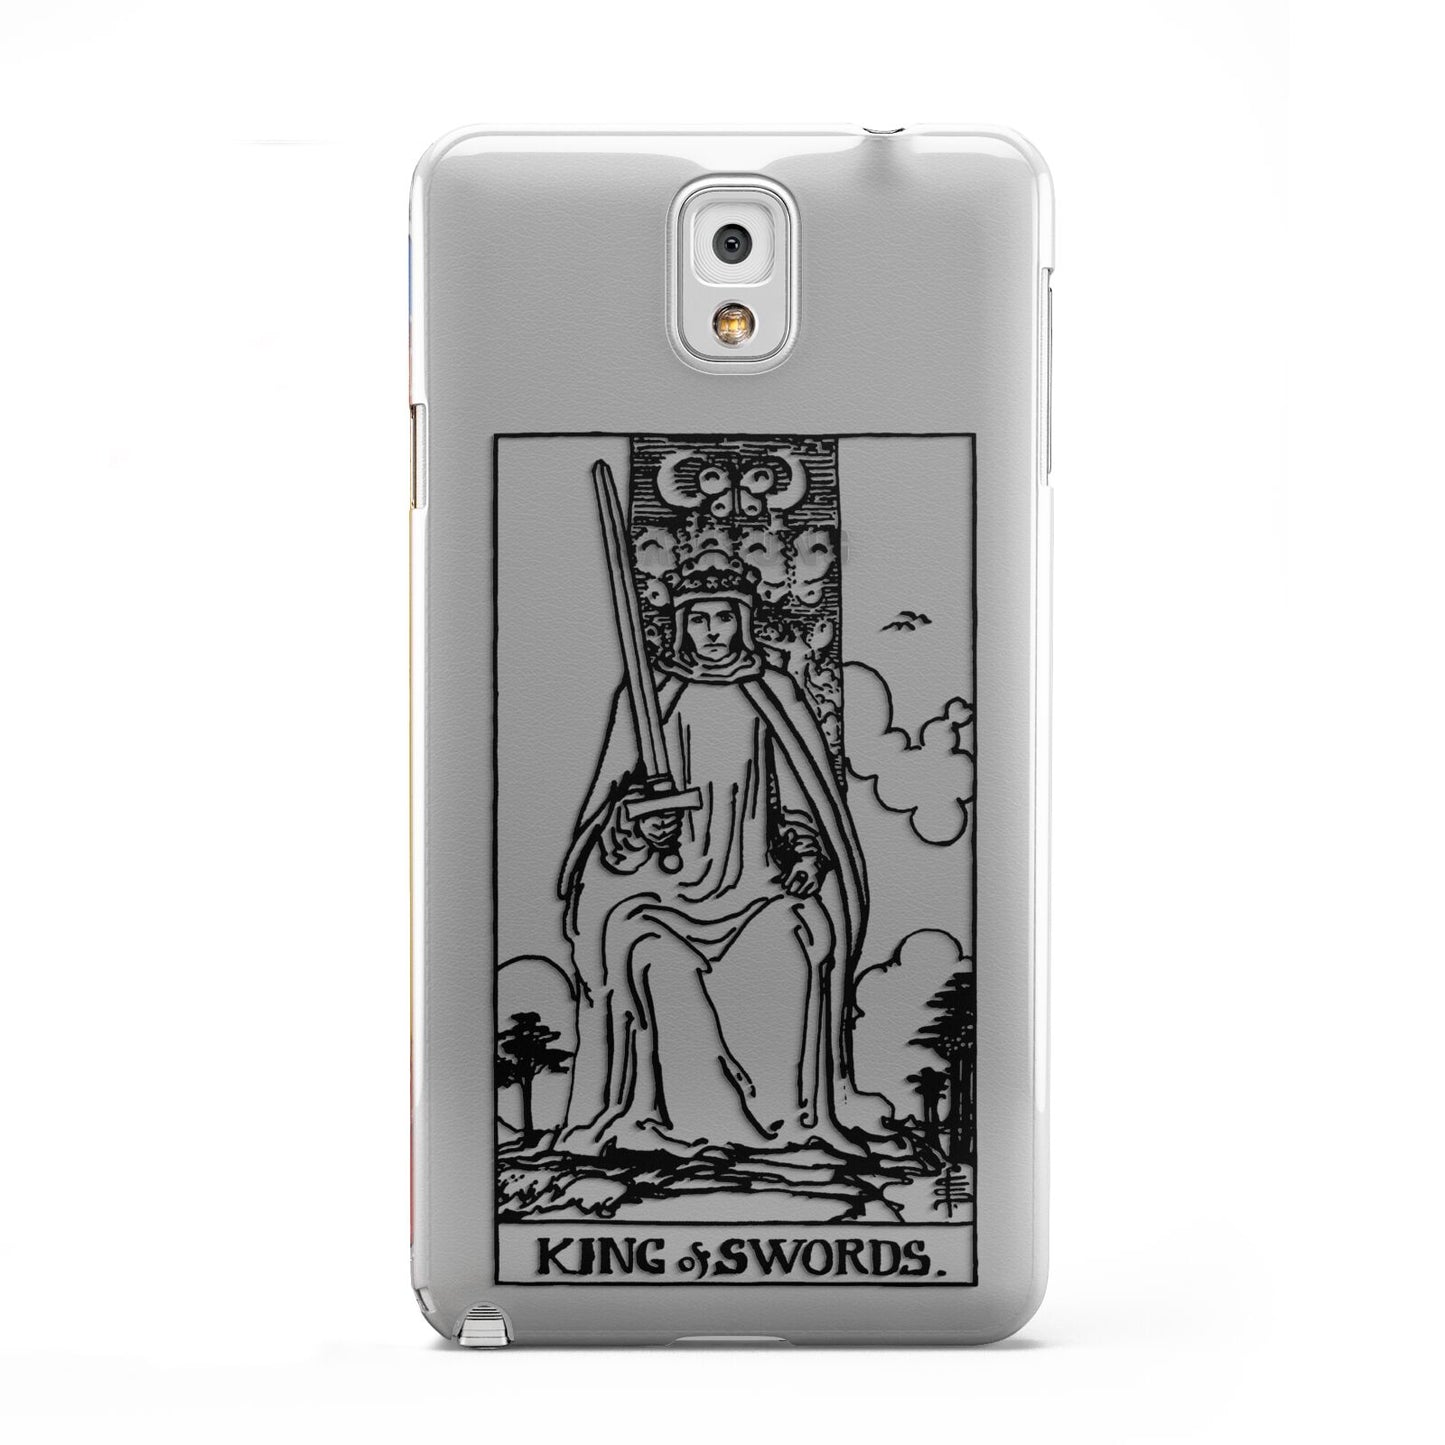 King of Swords Monochrome Samsung Galaxy Note 3 Case